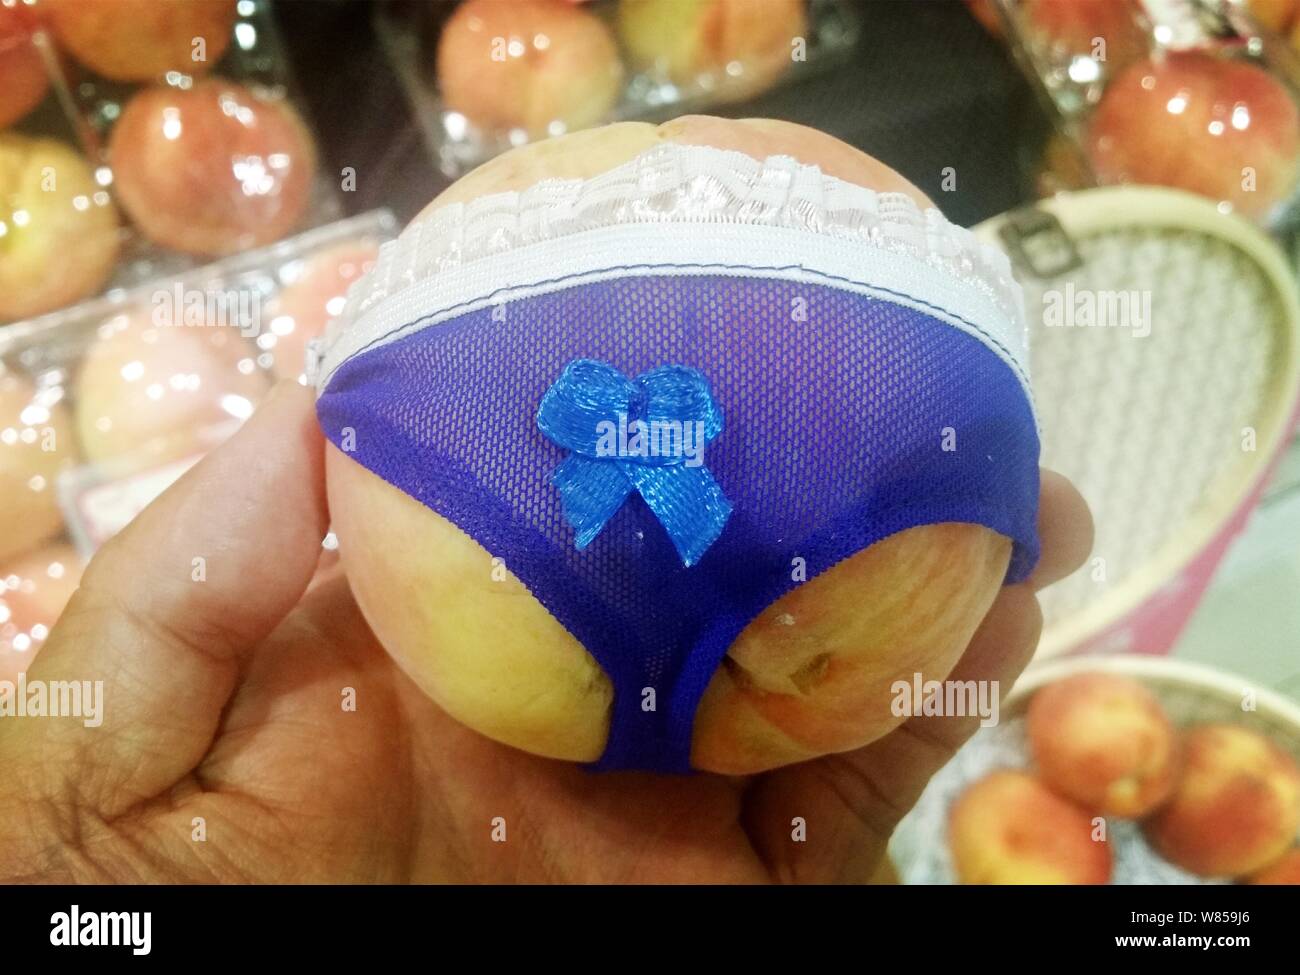 A customer shows a panty-wearing peach at a fruit shop in Qingdao